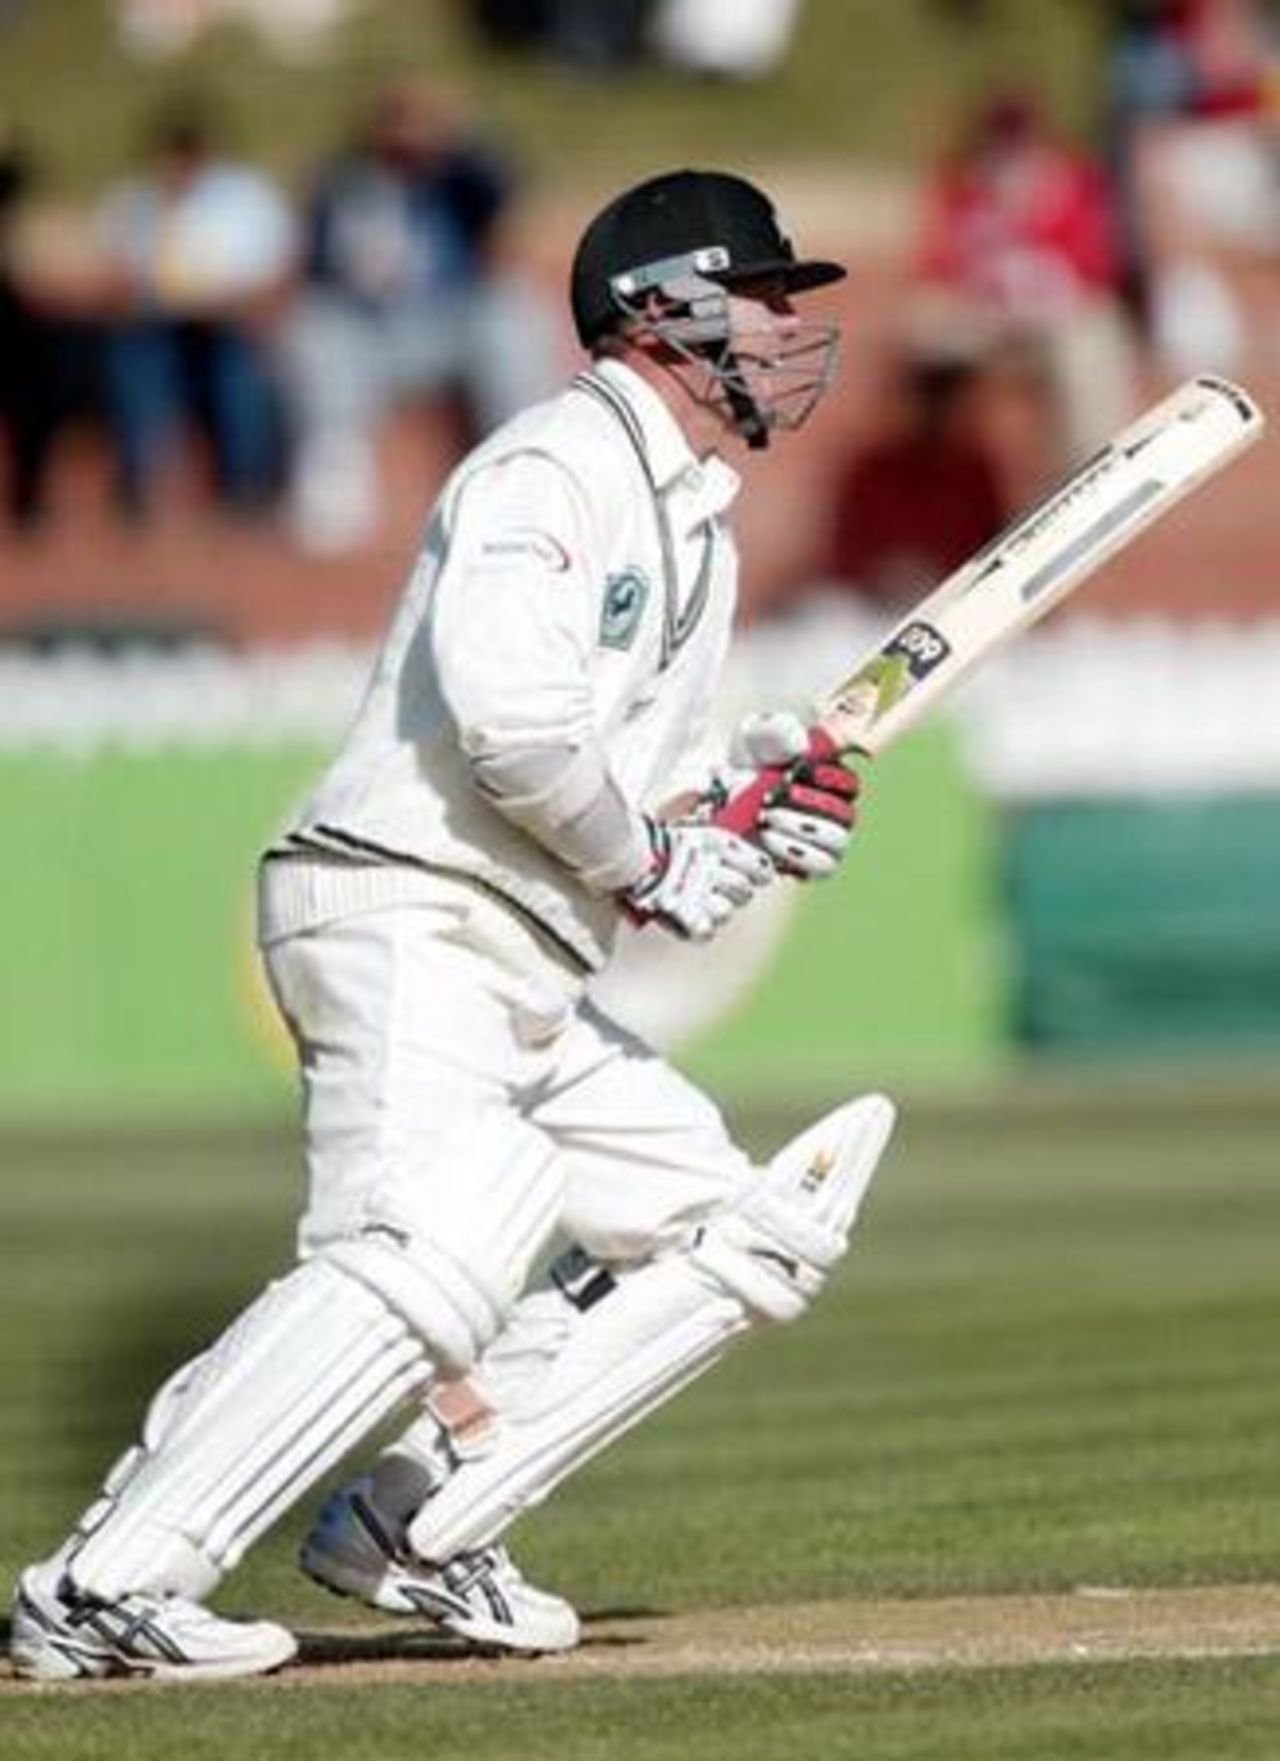 New Zealand batsman Mark Richardson plays a delivery down the ground during his first innings of 83 not out on the second day. 1st Test: New Zealand v India at Basin Reserve, Wellington, 12-16 December 2002 (13 December 2002).